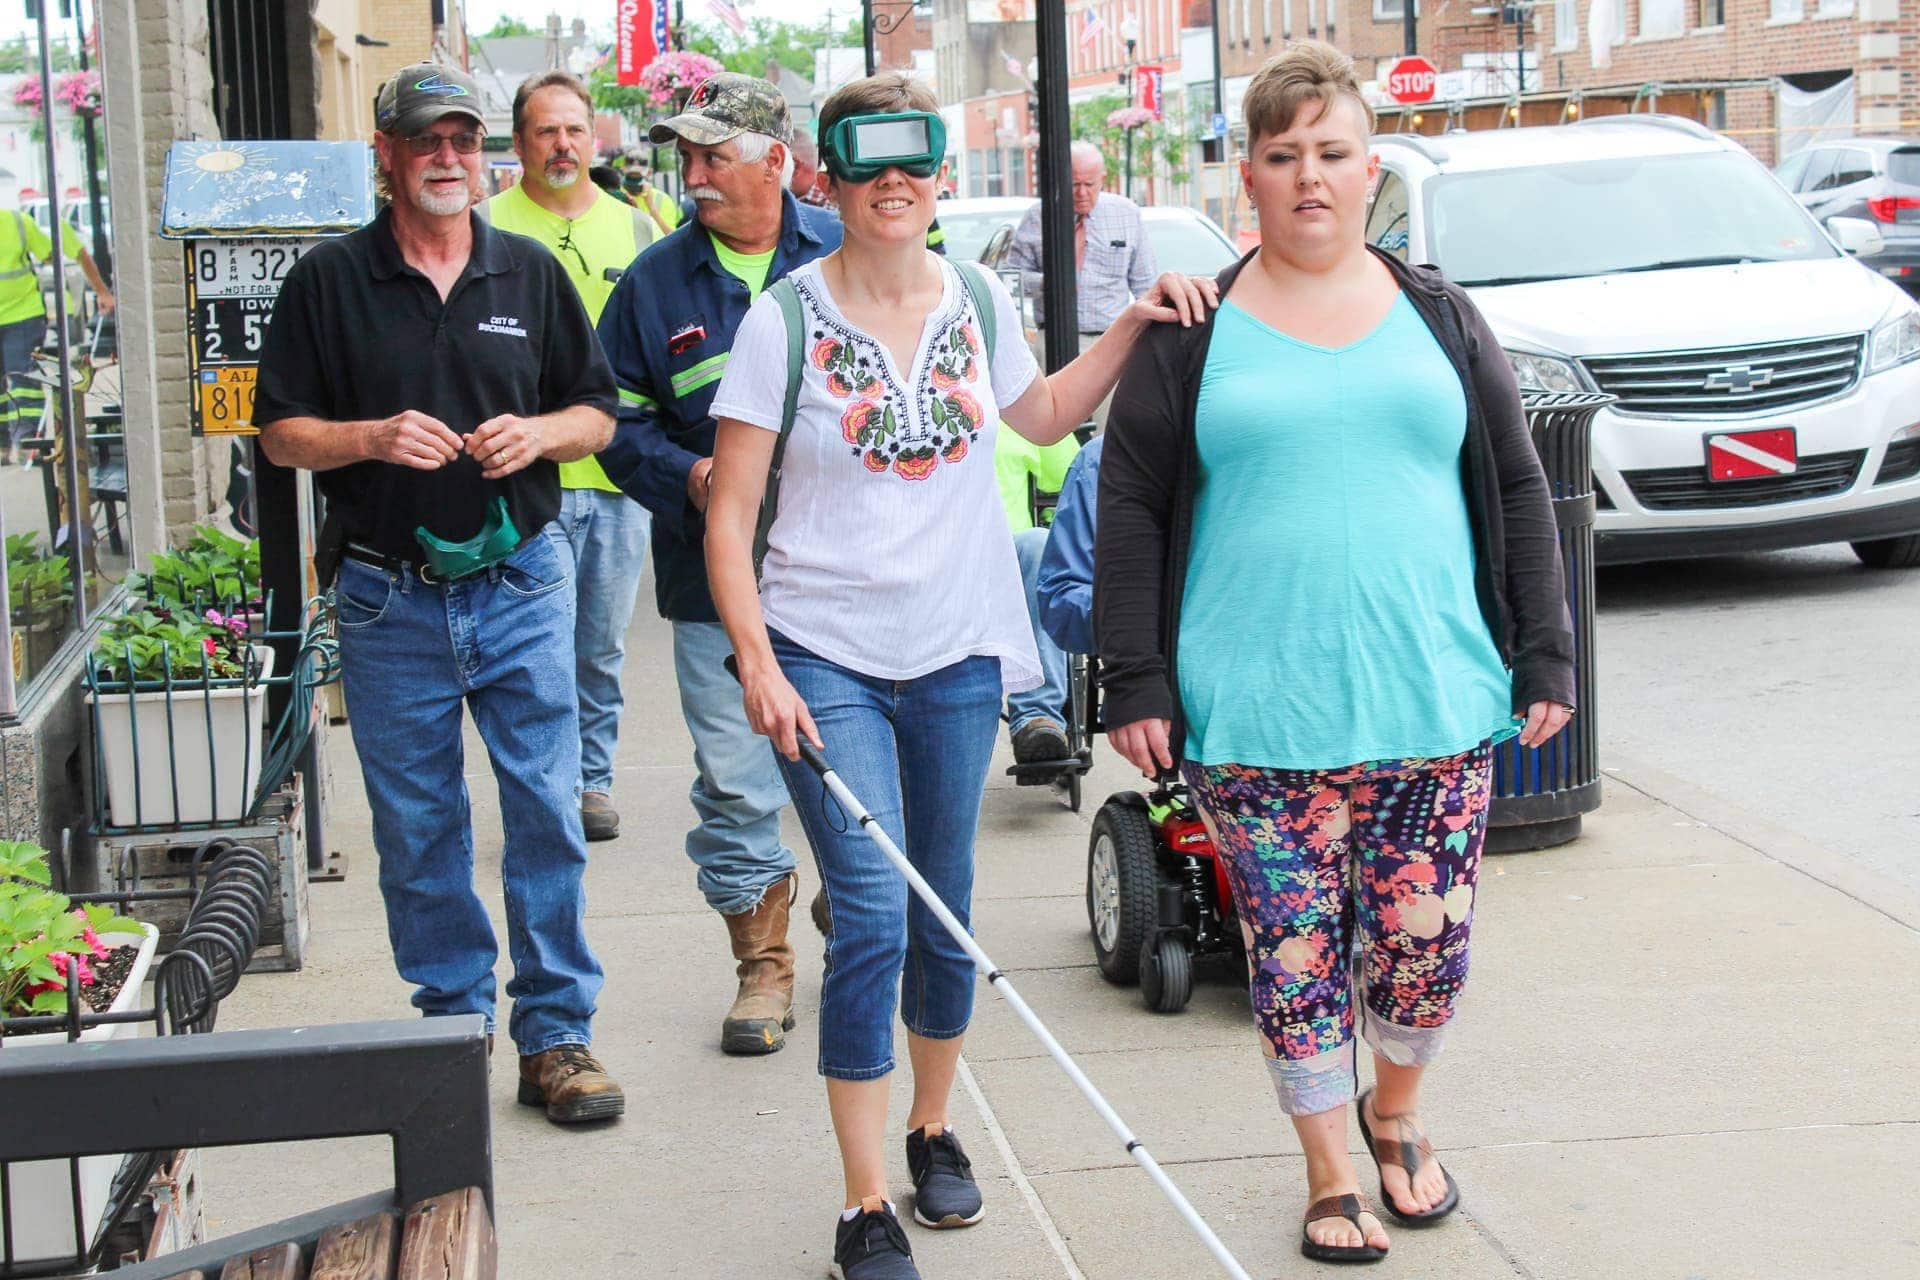 Slippery speak pin Walk a Mile in my Shoes': Disabilities awareness exercise highlights city's  ADA-related improvements, challenges – My Buckhannon